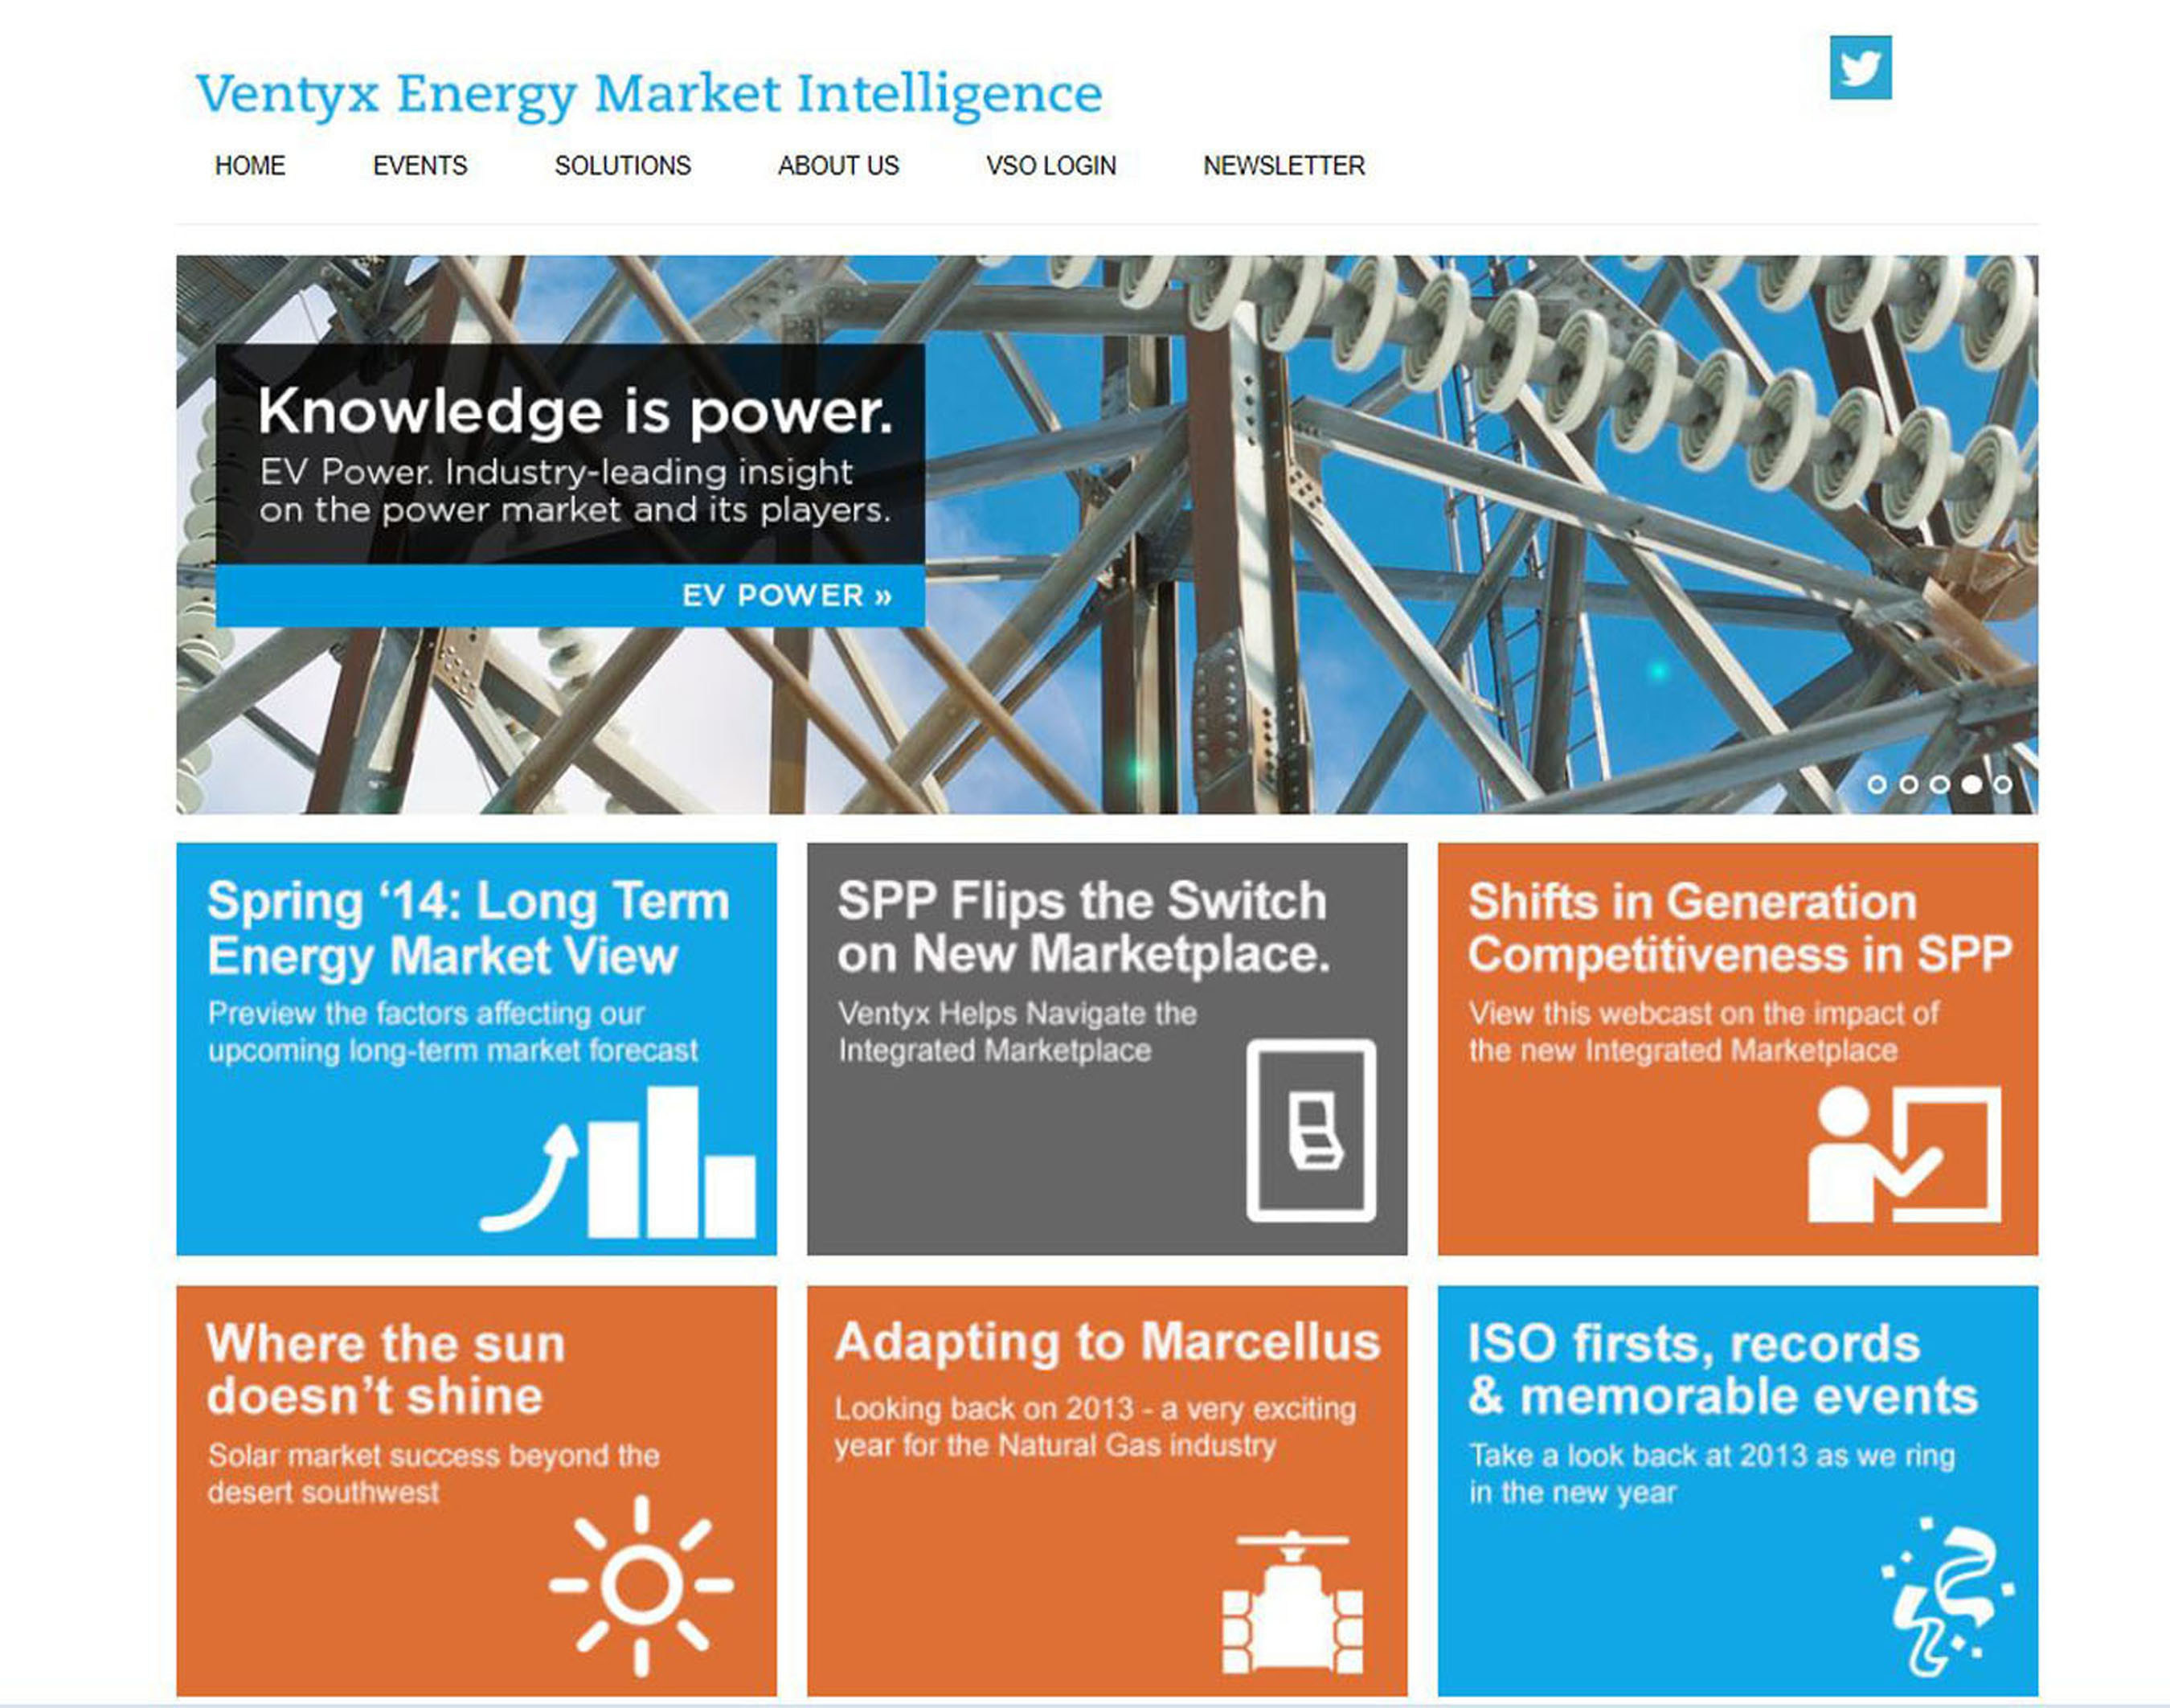 The Ventyx Energy Market Intelligence website offers insights and analysis and the latest events and trends in the energy industry. (PRNewsFoto/Ventyx)